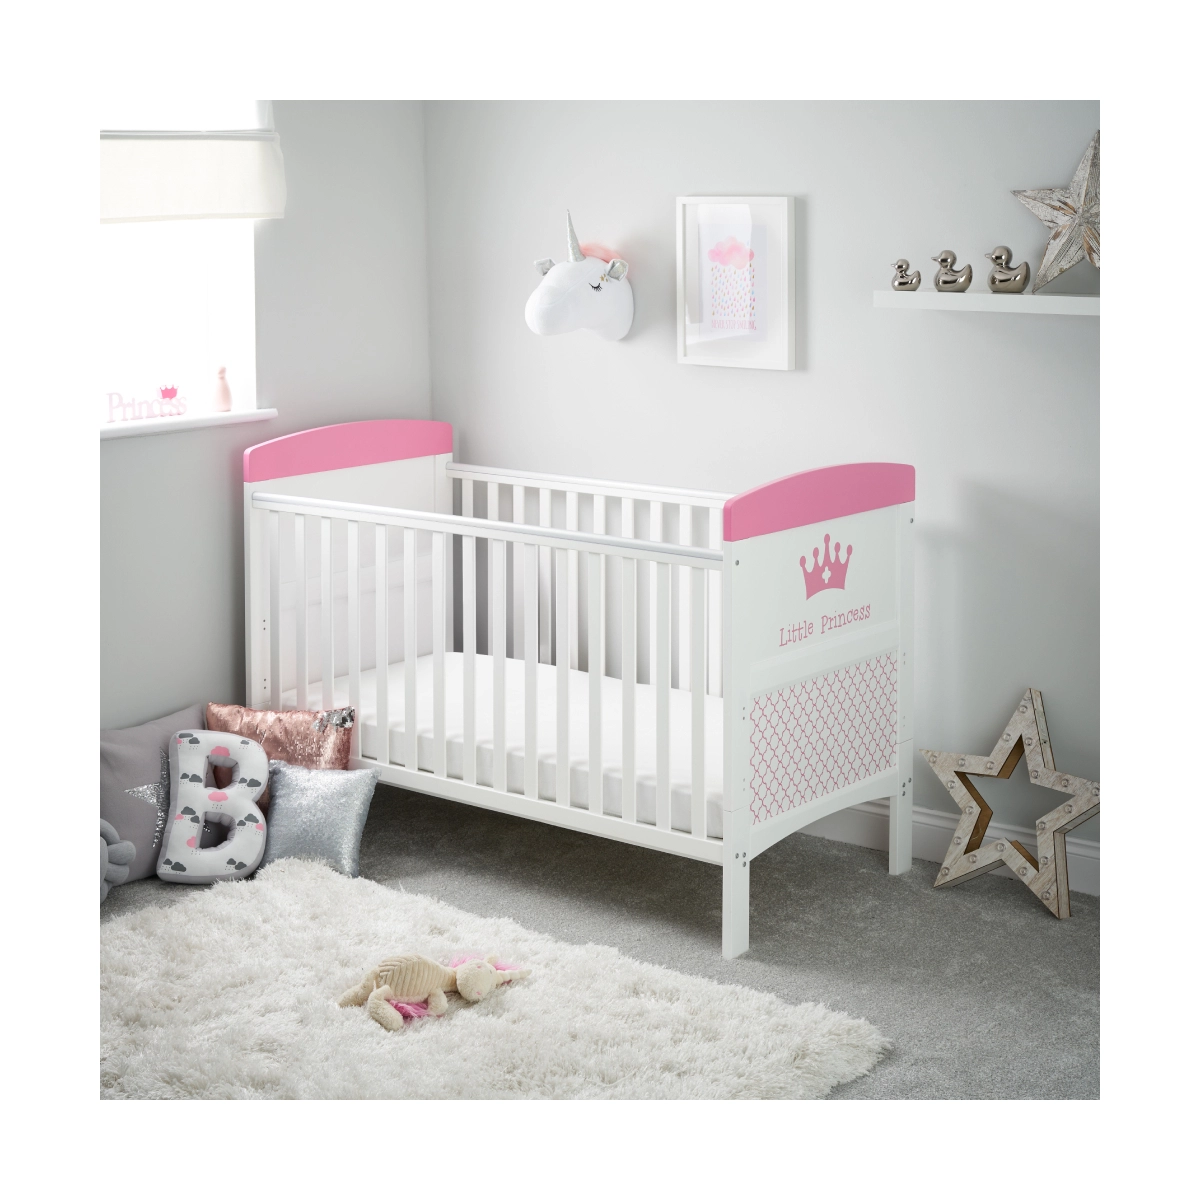 Image of Obaby Grace Inspire Cotbed-Little Princess